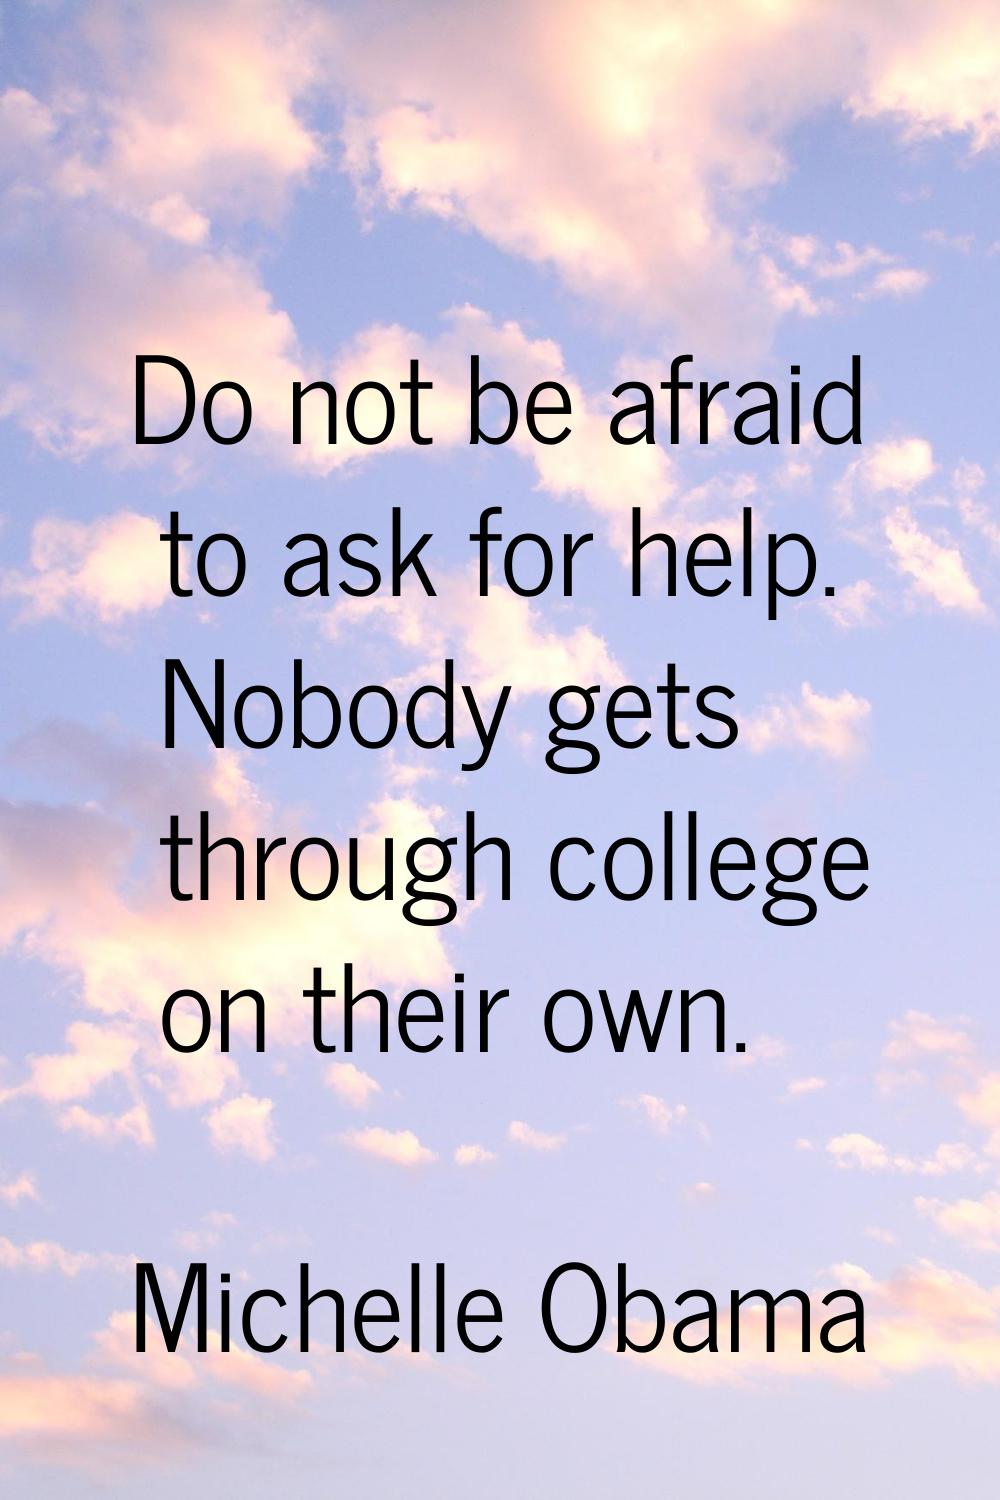 Do not be afraid to ask for help. Nobody gets through college on their own.